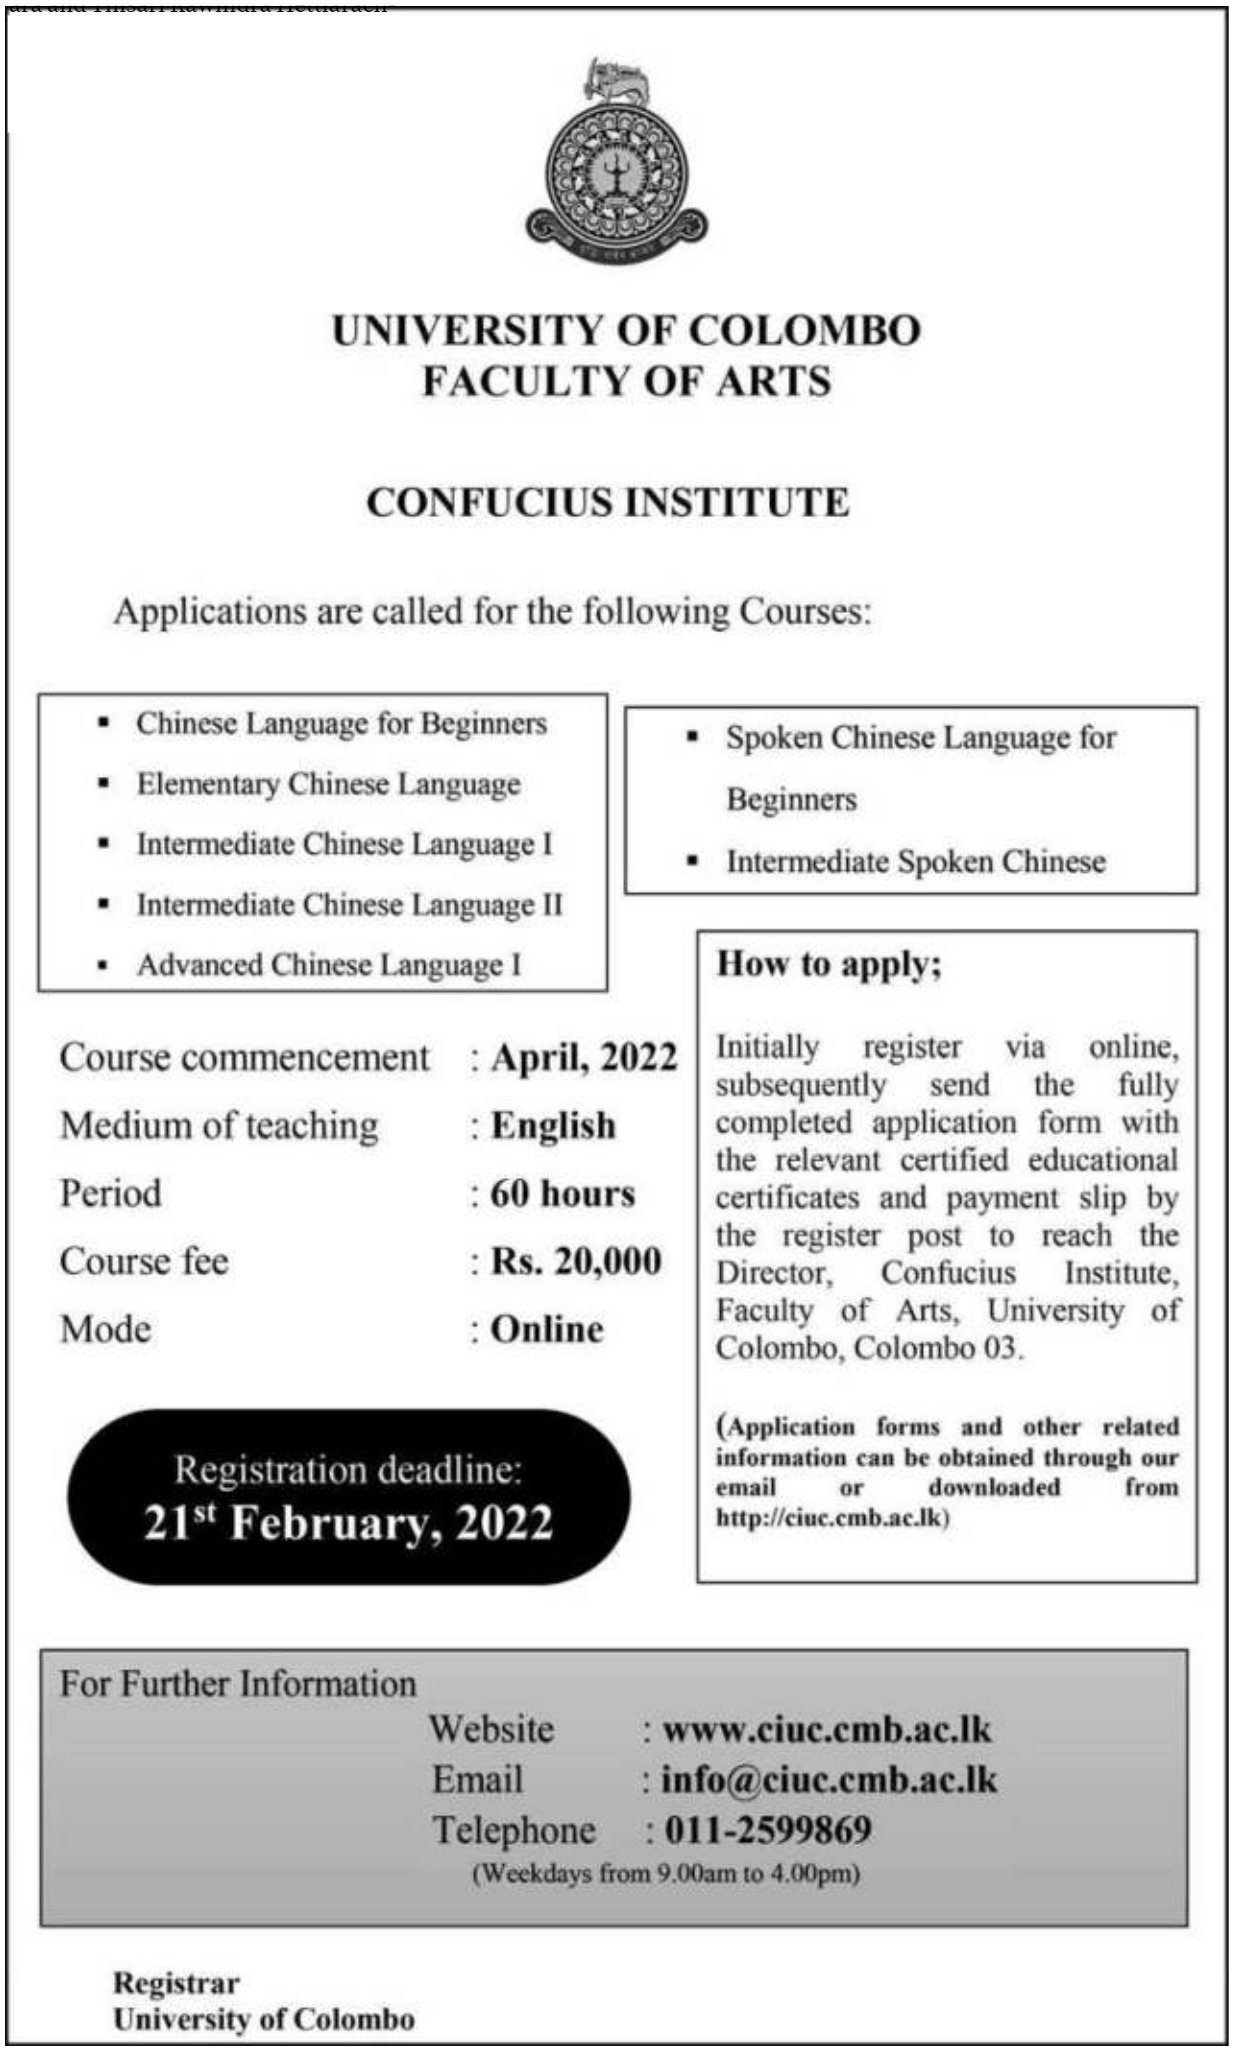 Chinese Language Certificate Courses 2022 in University of Colombo